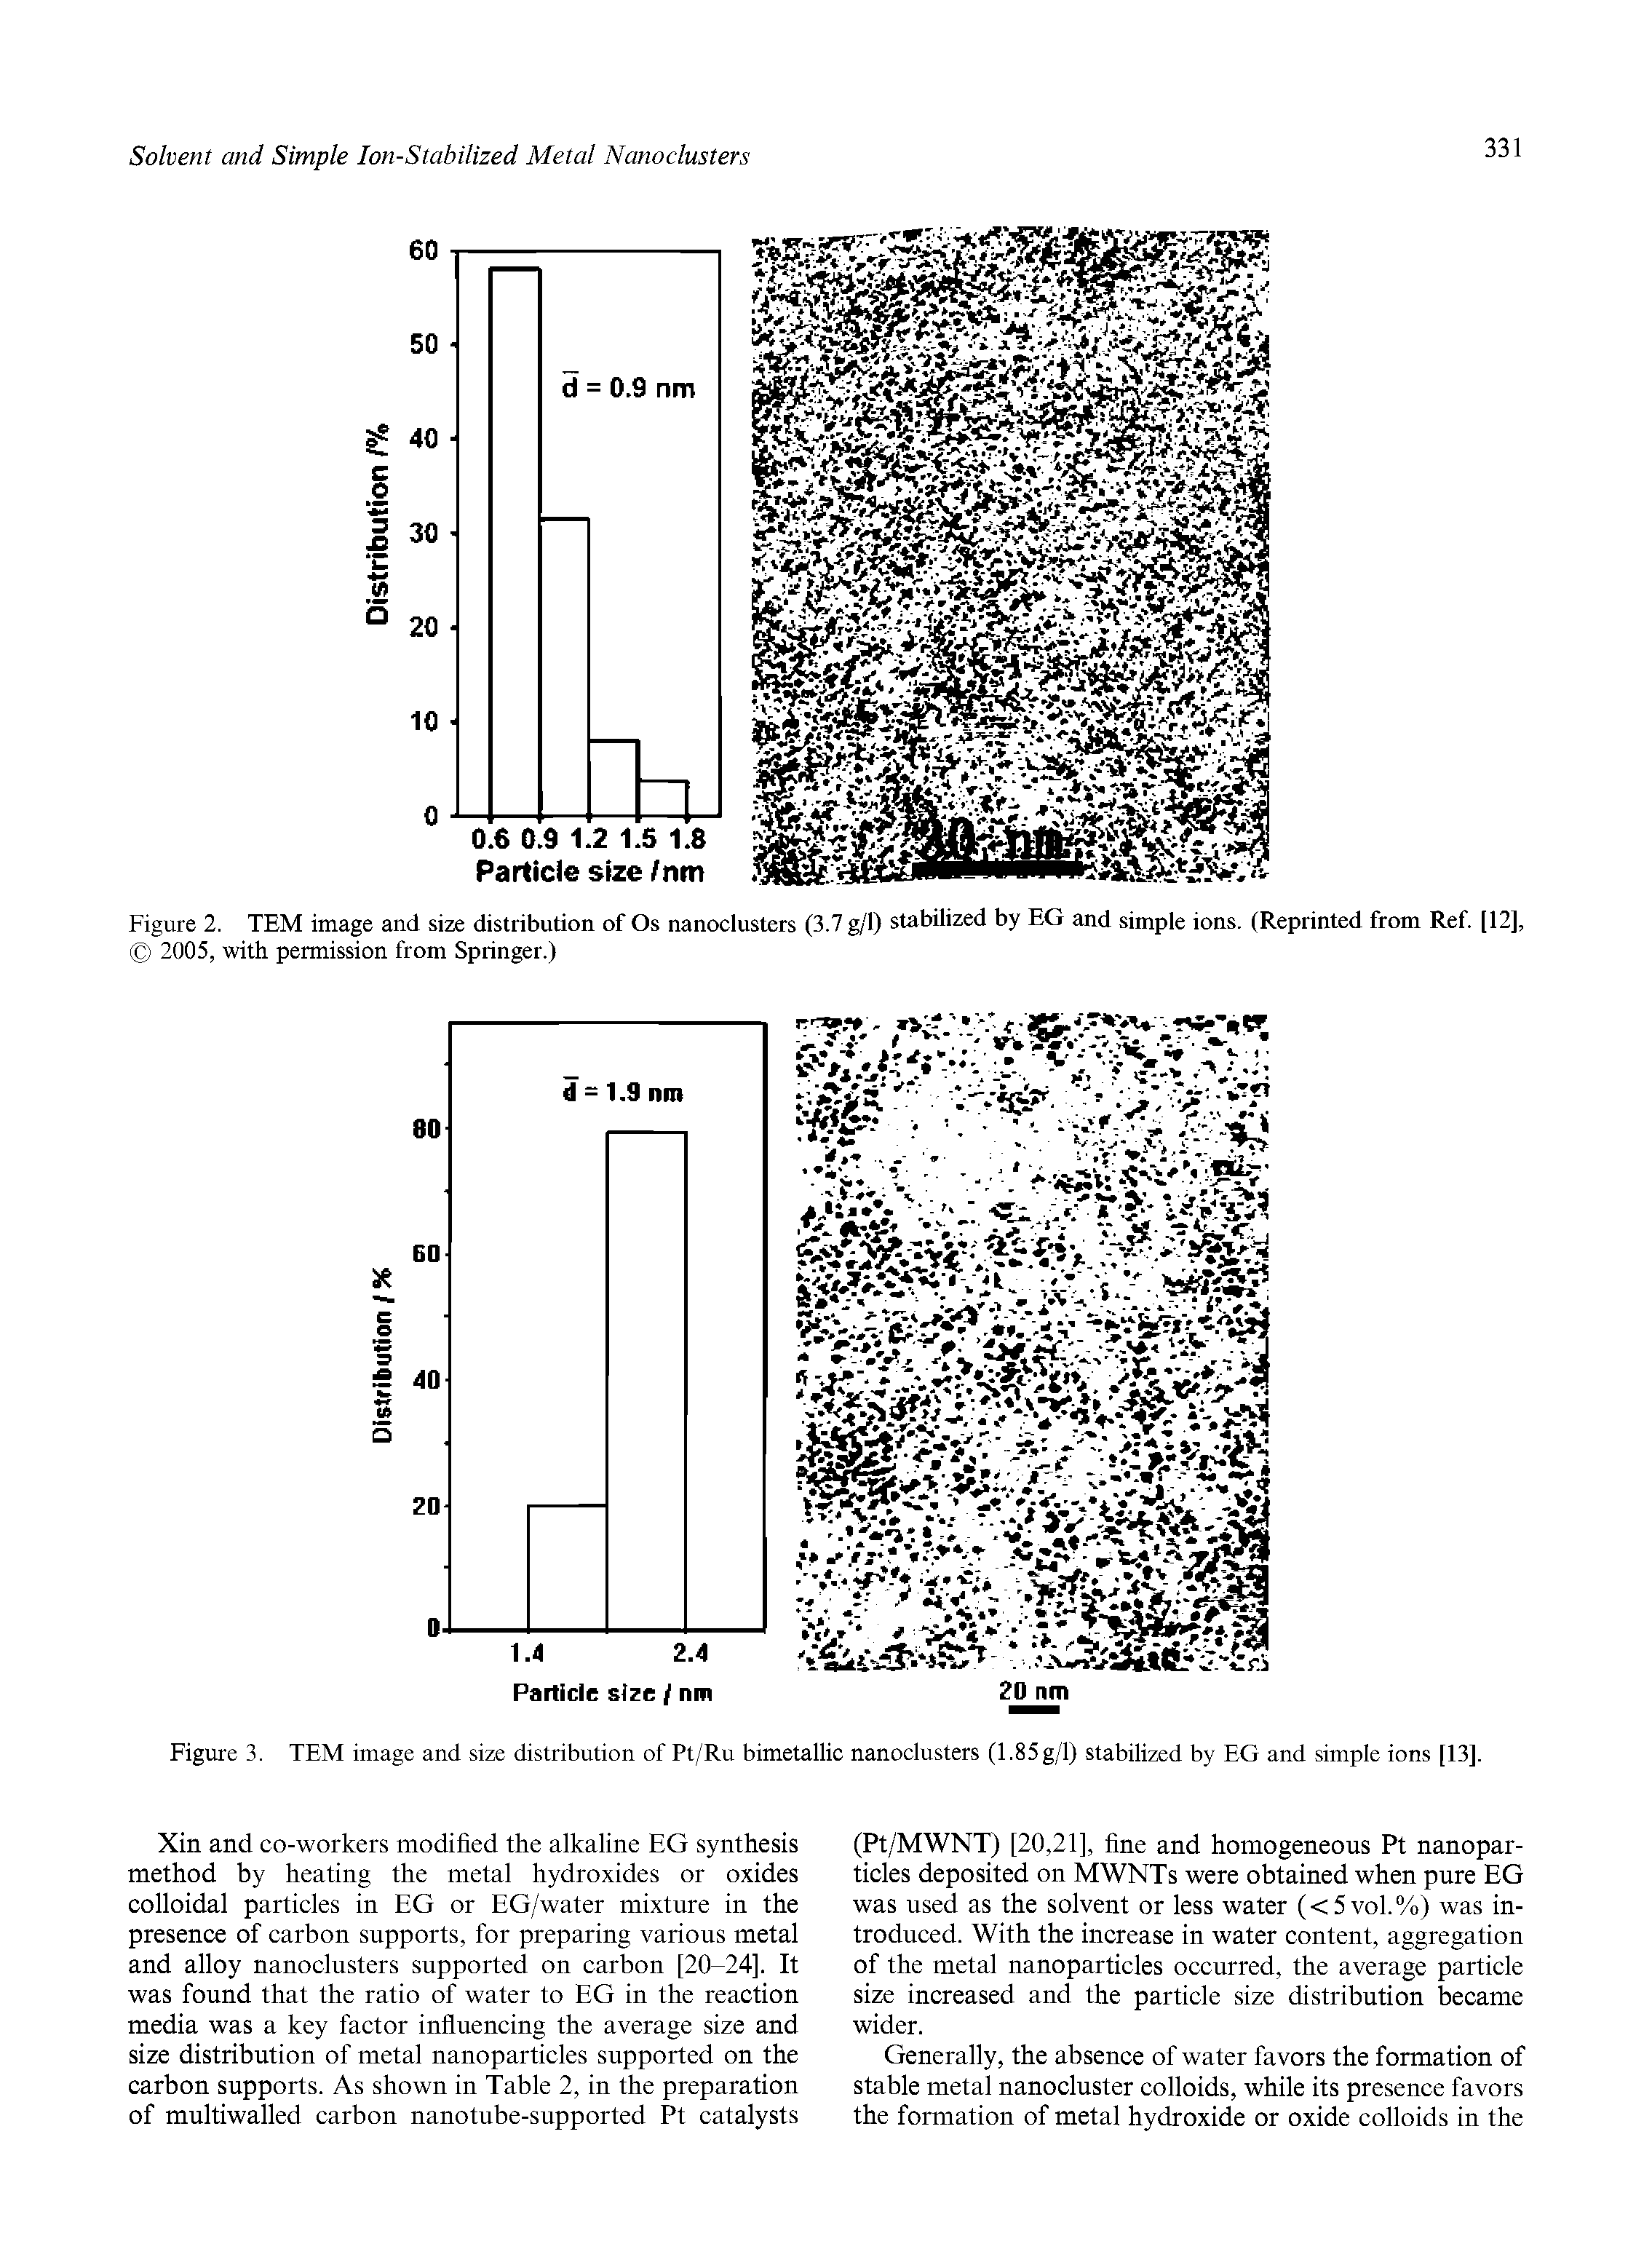 Figure 3. TEM image and size distribution of Pt/Ru bimetallic nanoclusters (1.85g/l) stabilized by EG and simple ions [13].